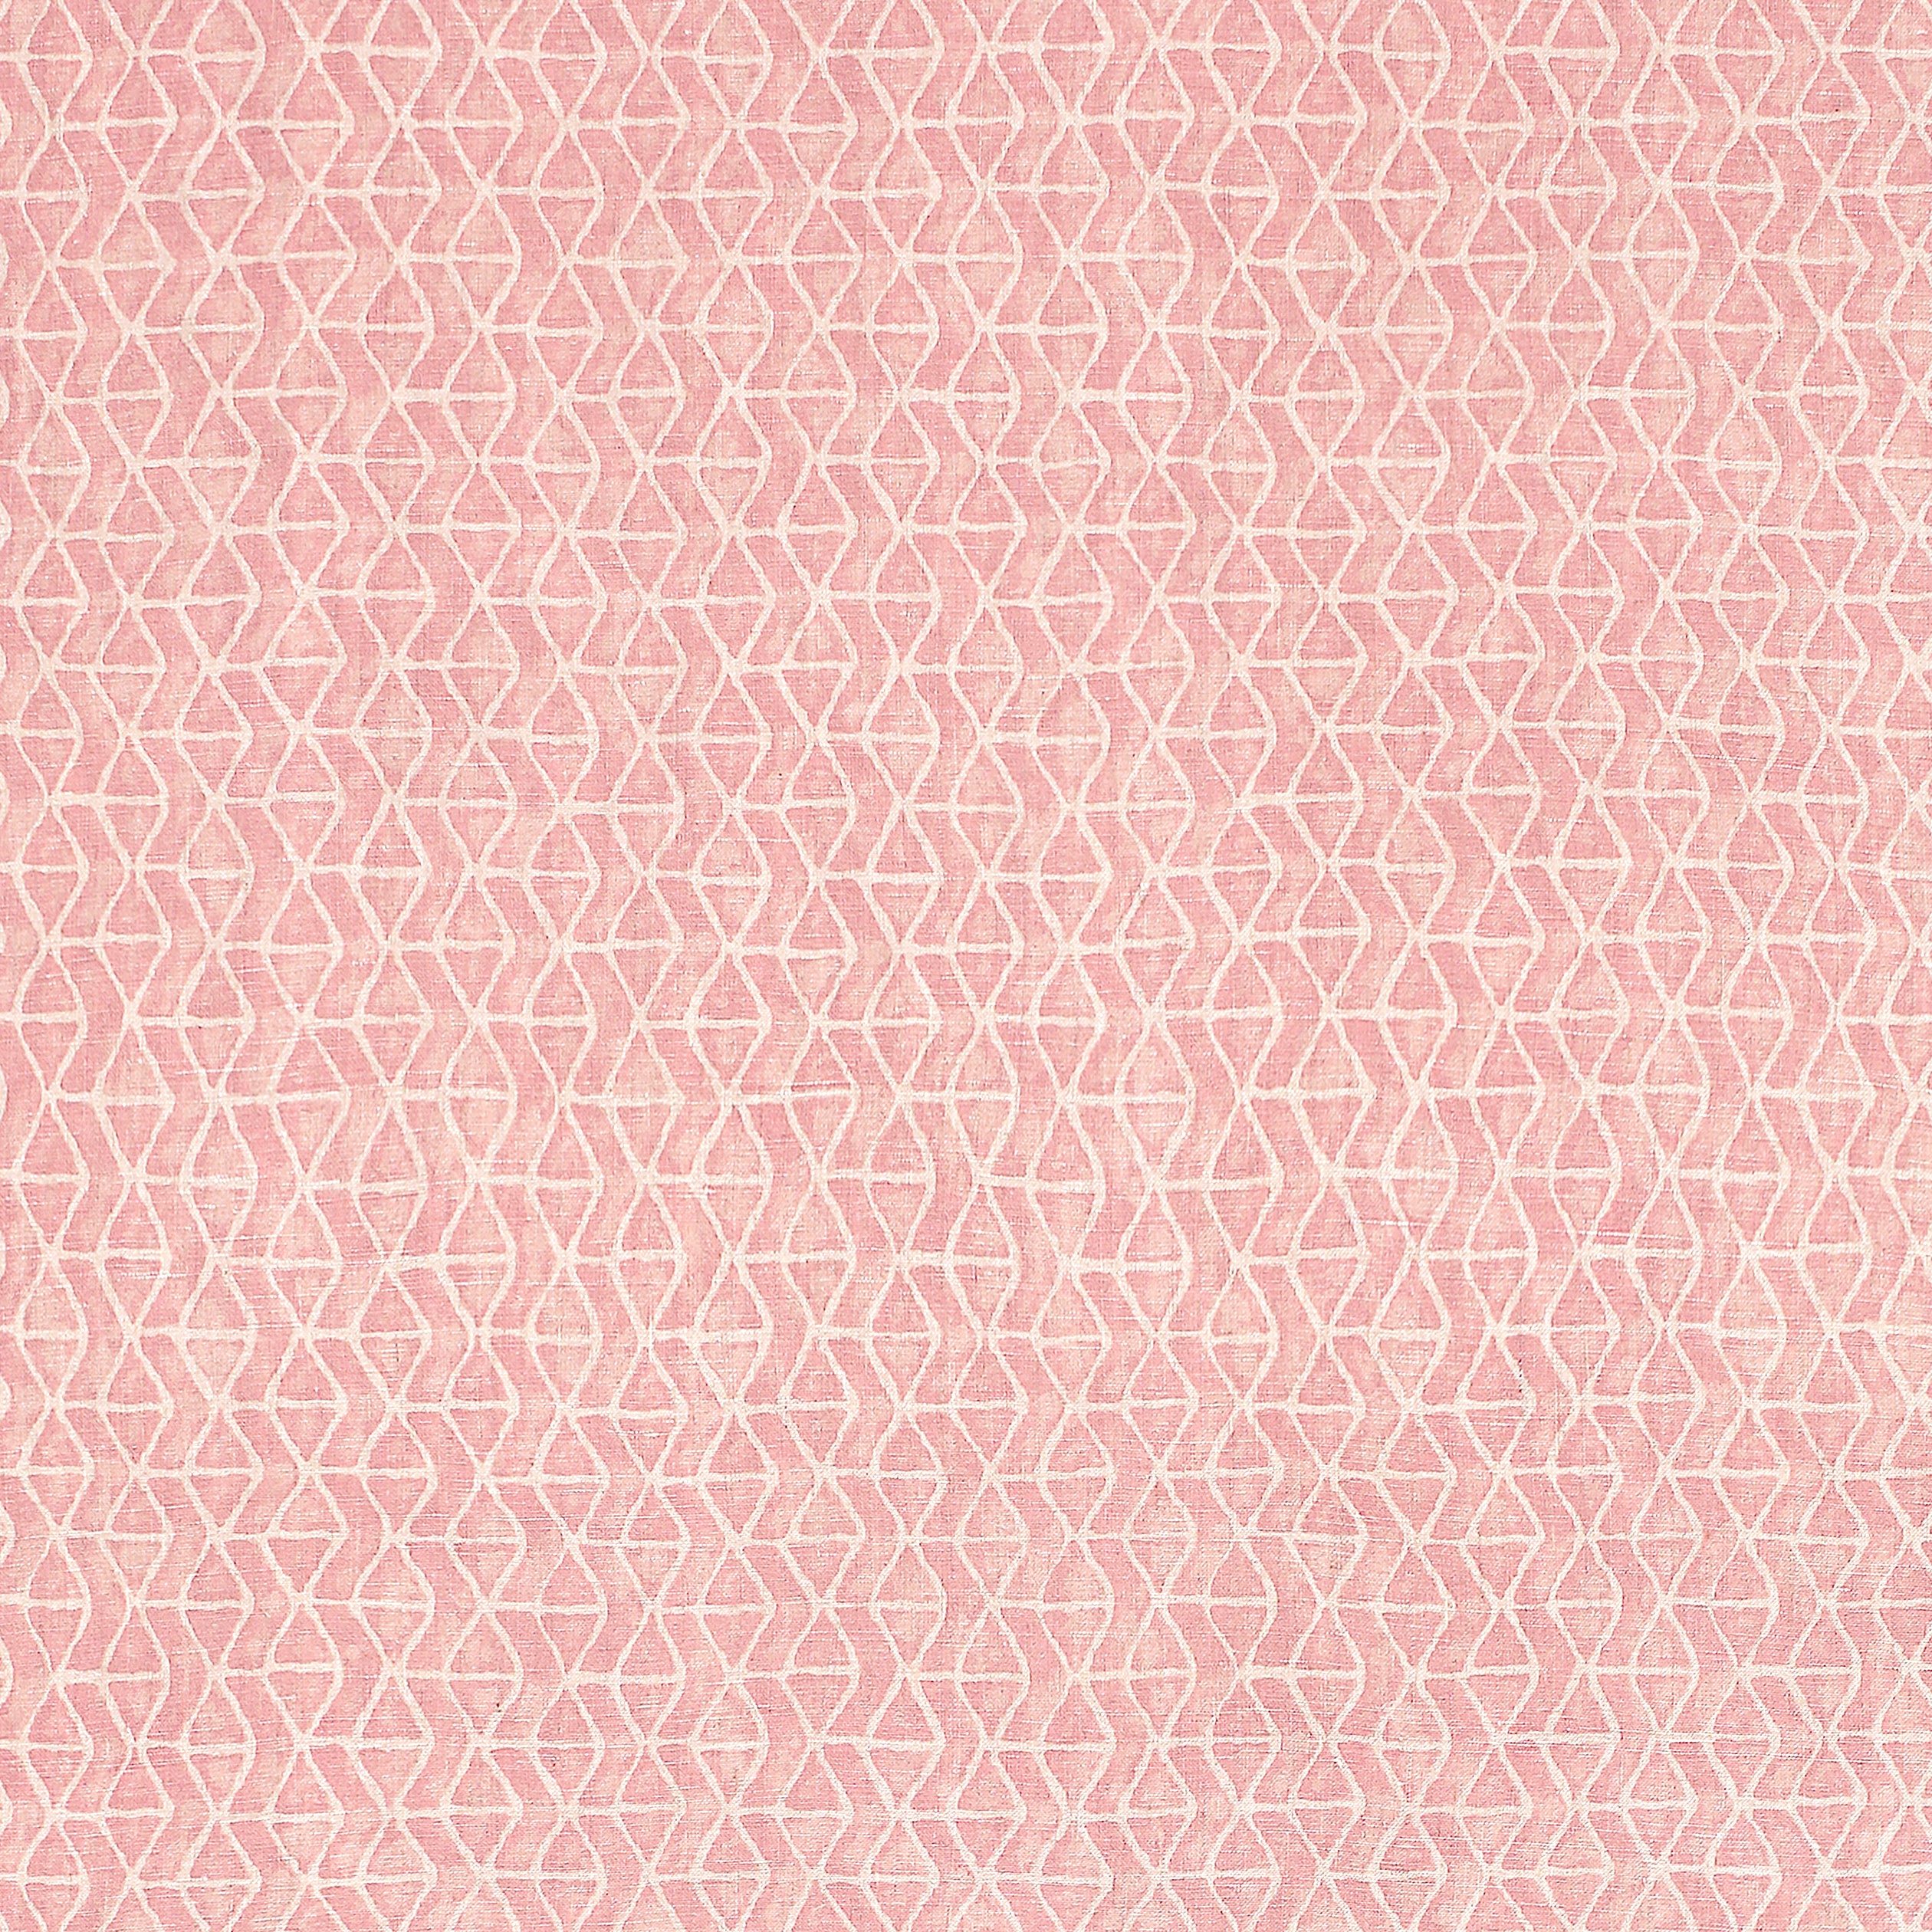 Stony Brook fabric in blush color - pattern number F942001 - by Thibaut in the Sojourn collection